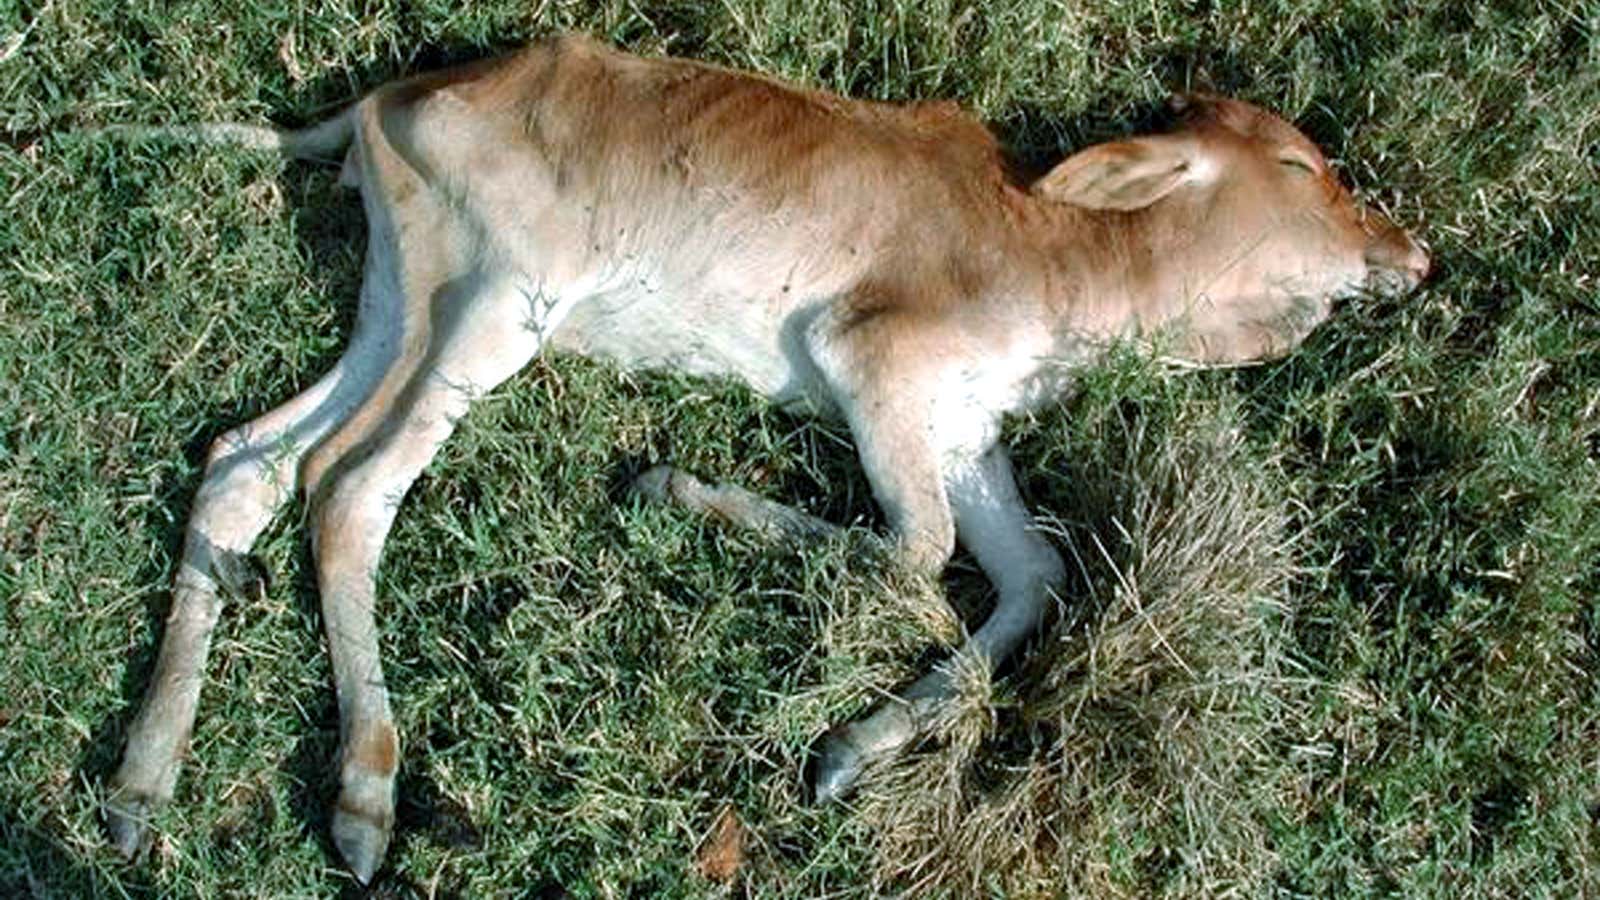 The carcass of a calf in Tanzania, where vaillagers report huge cattle losses due to the TseTse fly.